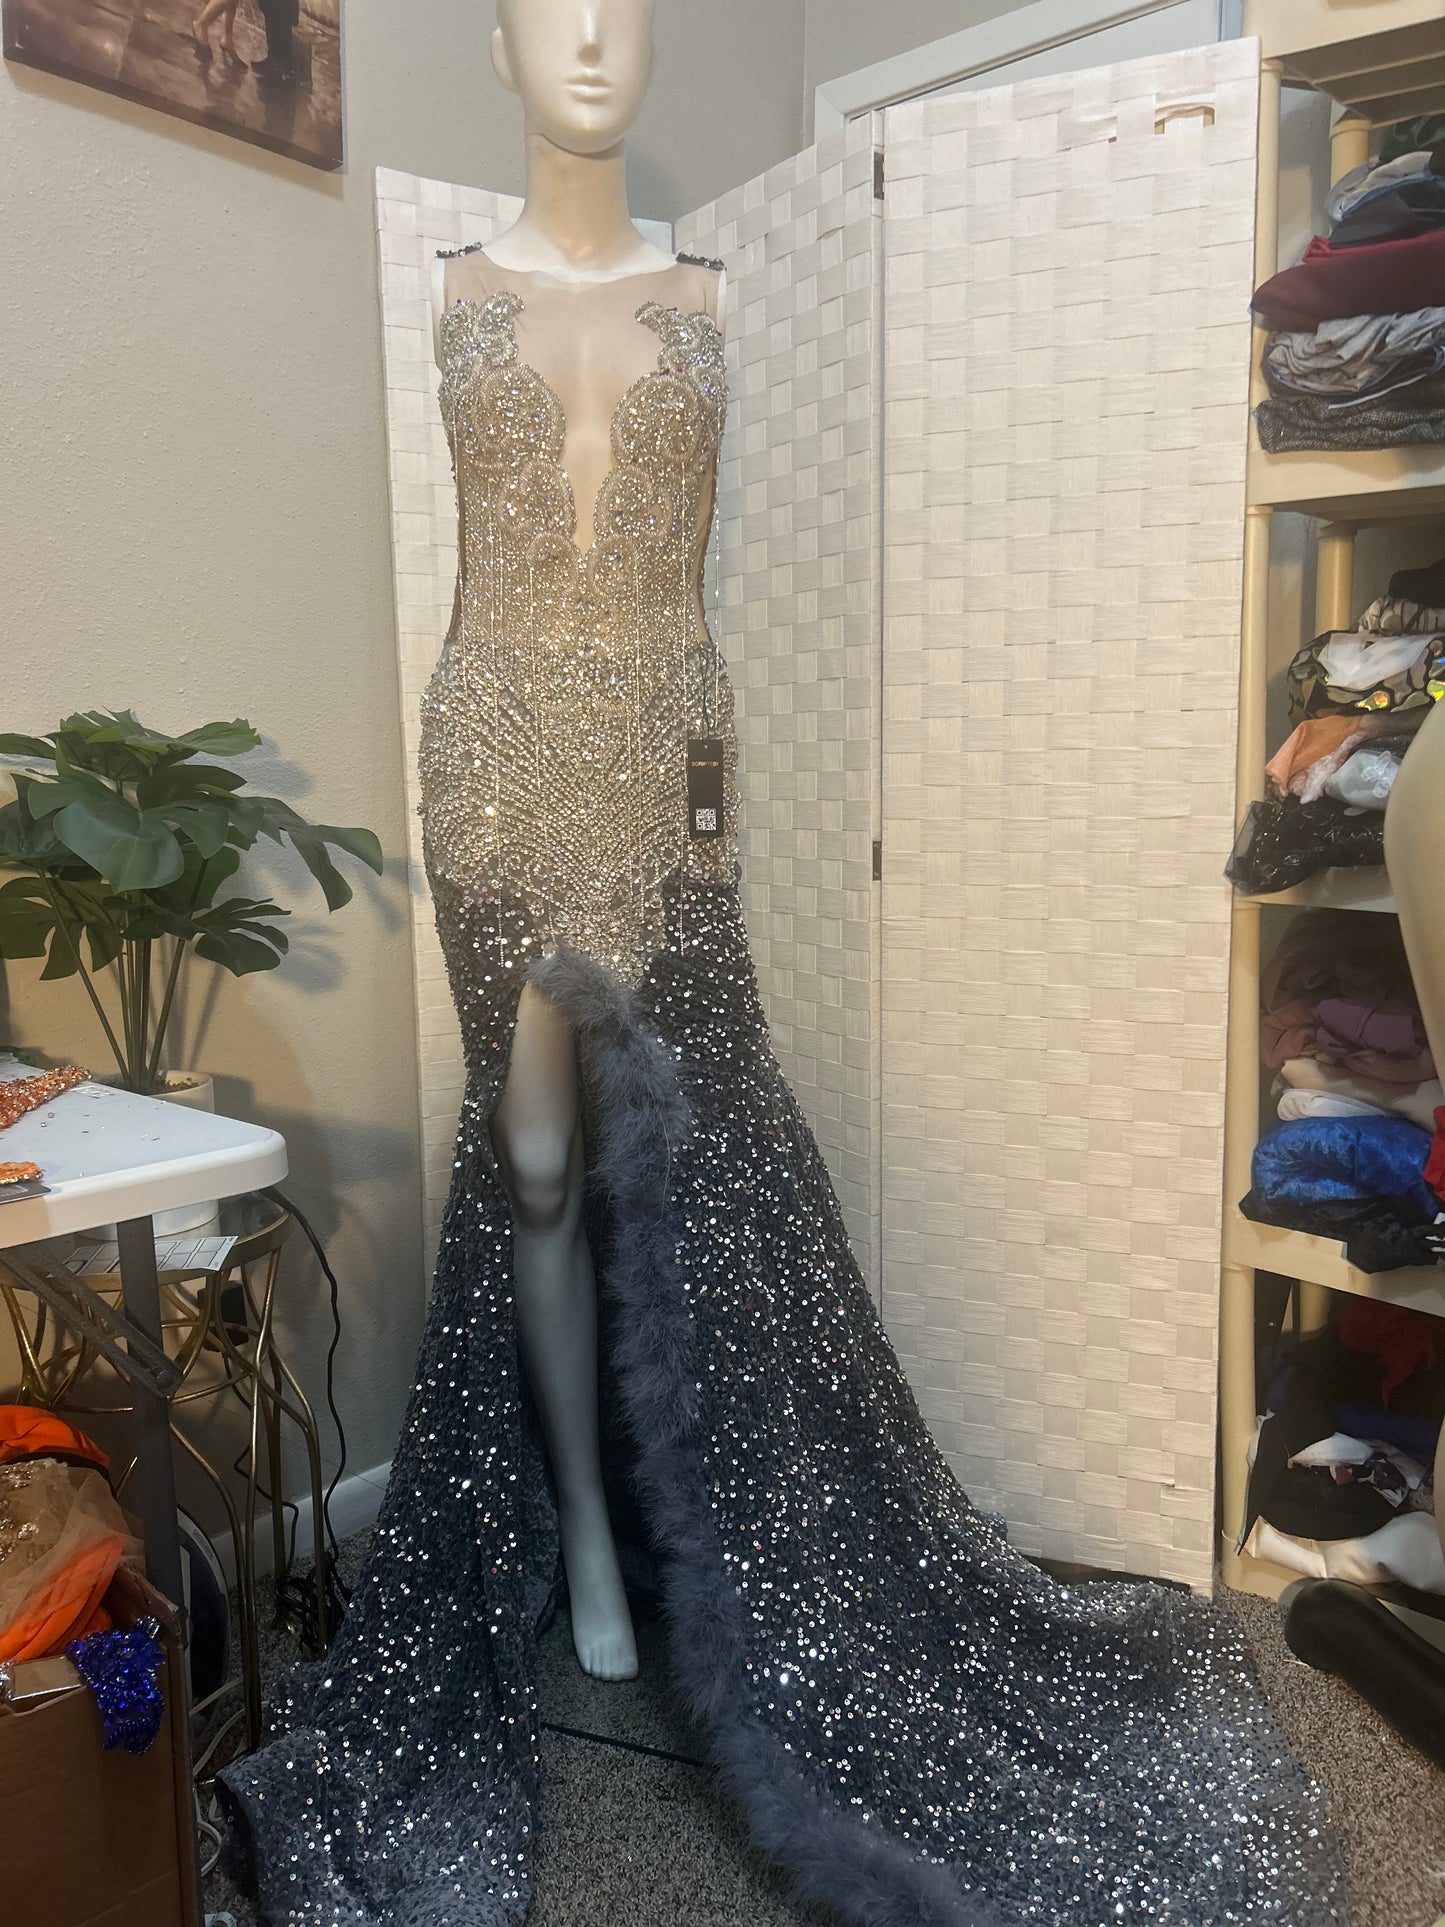 Prom Gown (Mermaid) Silver Sequin